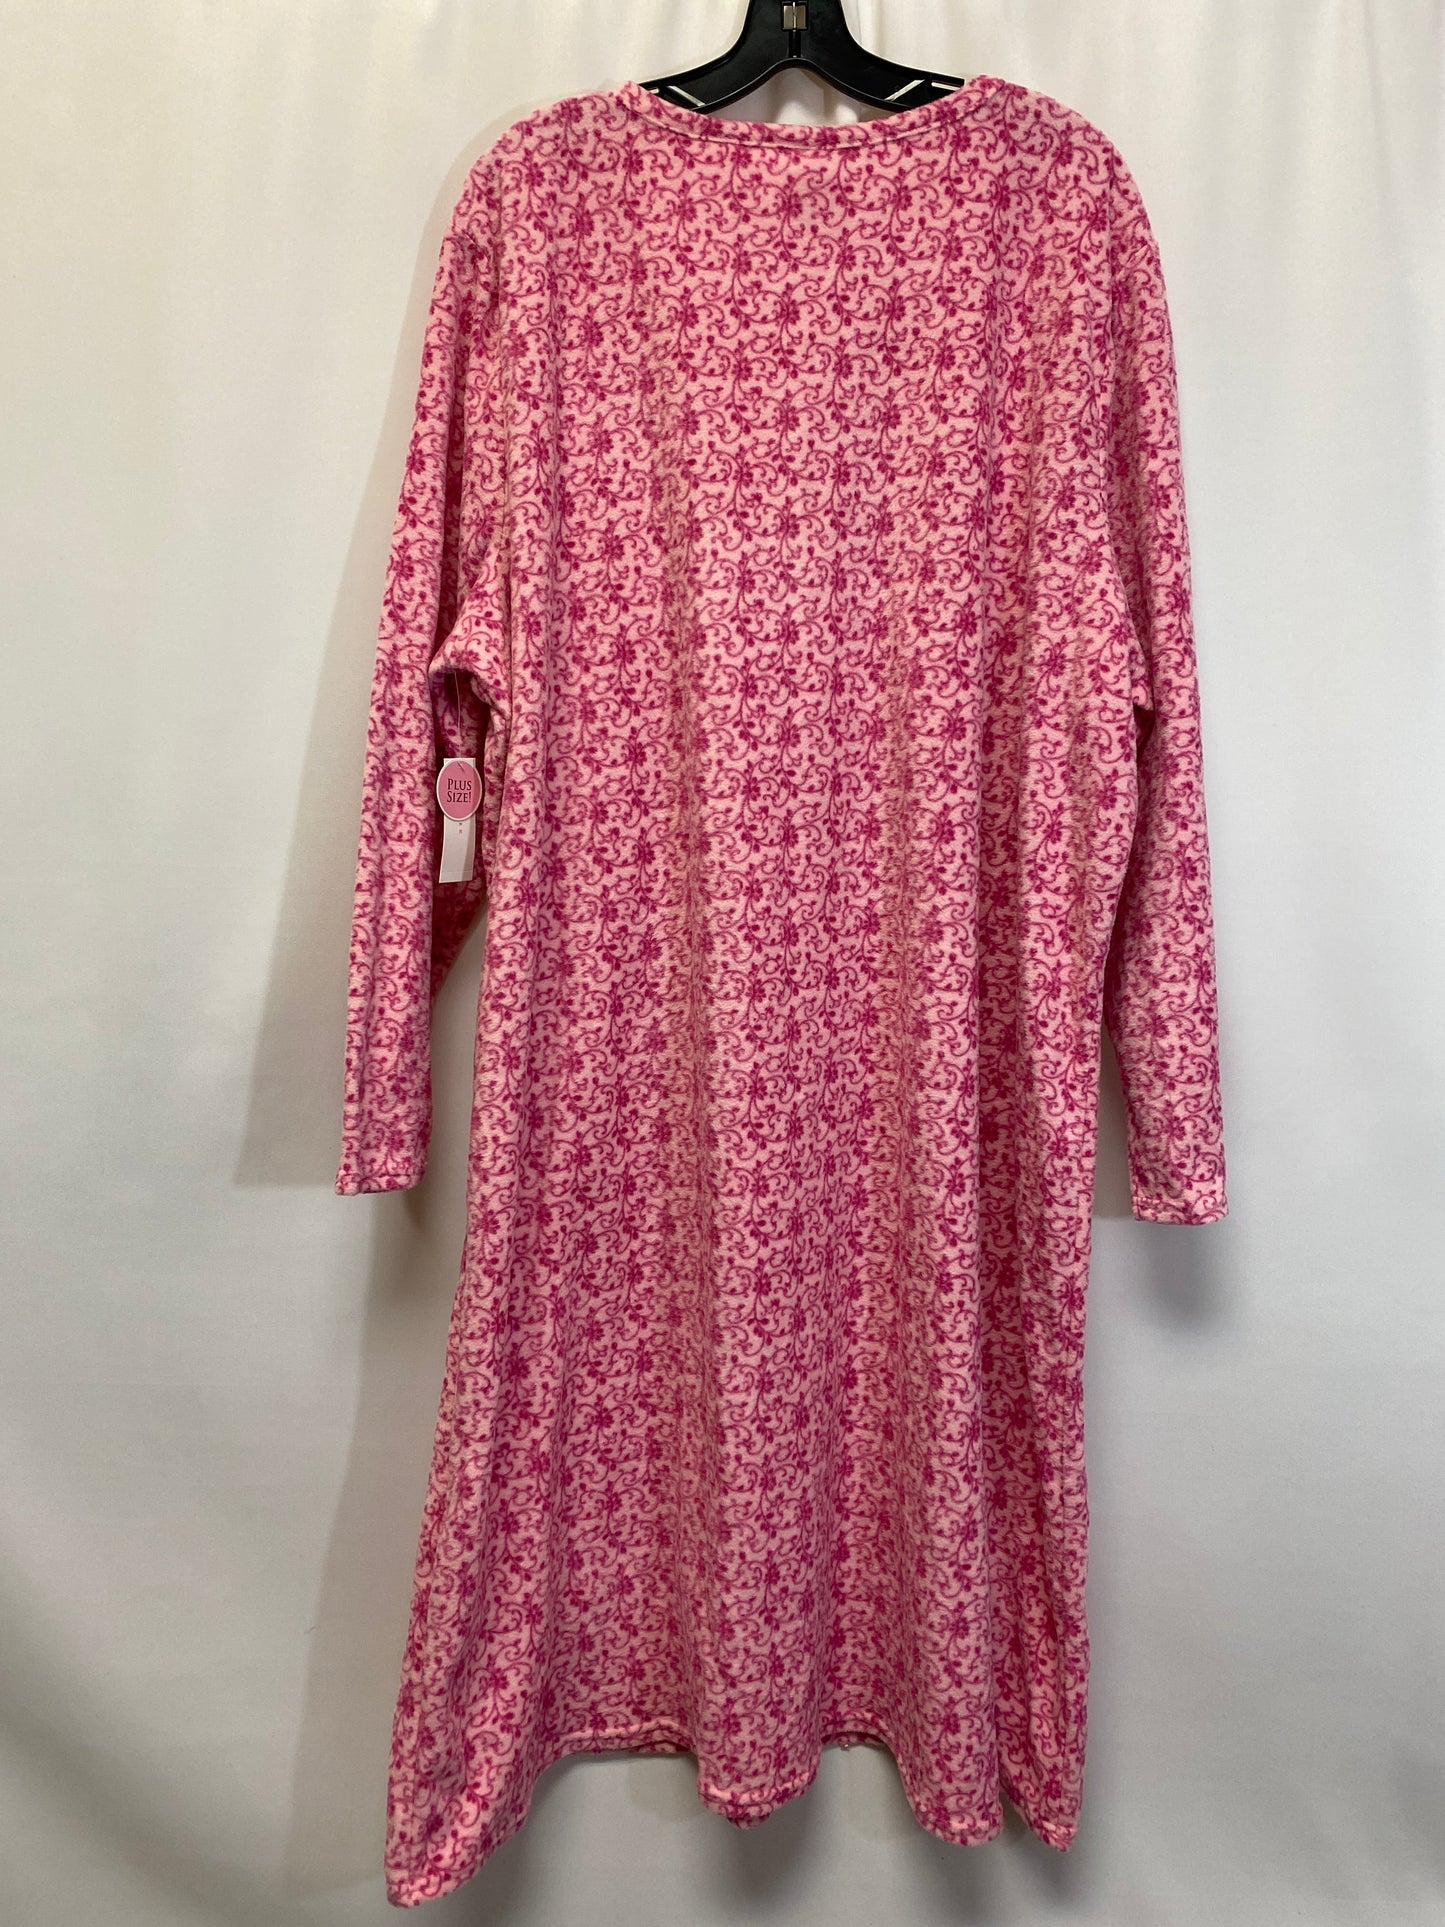 Pink Nightgown Clothes Mentor, Size 3x